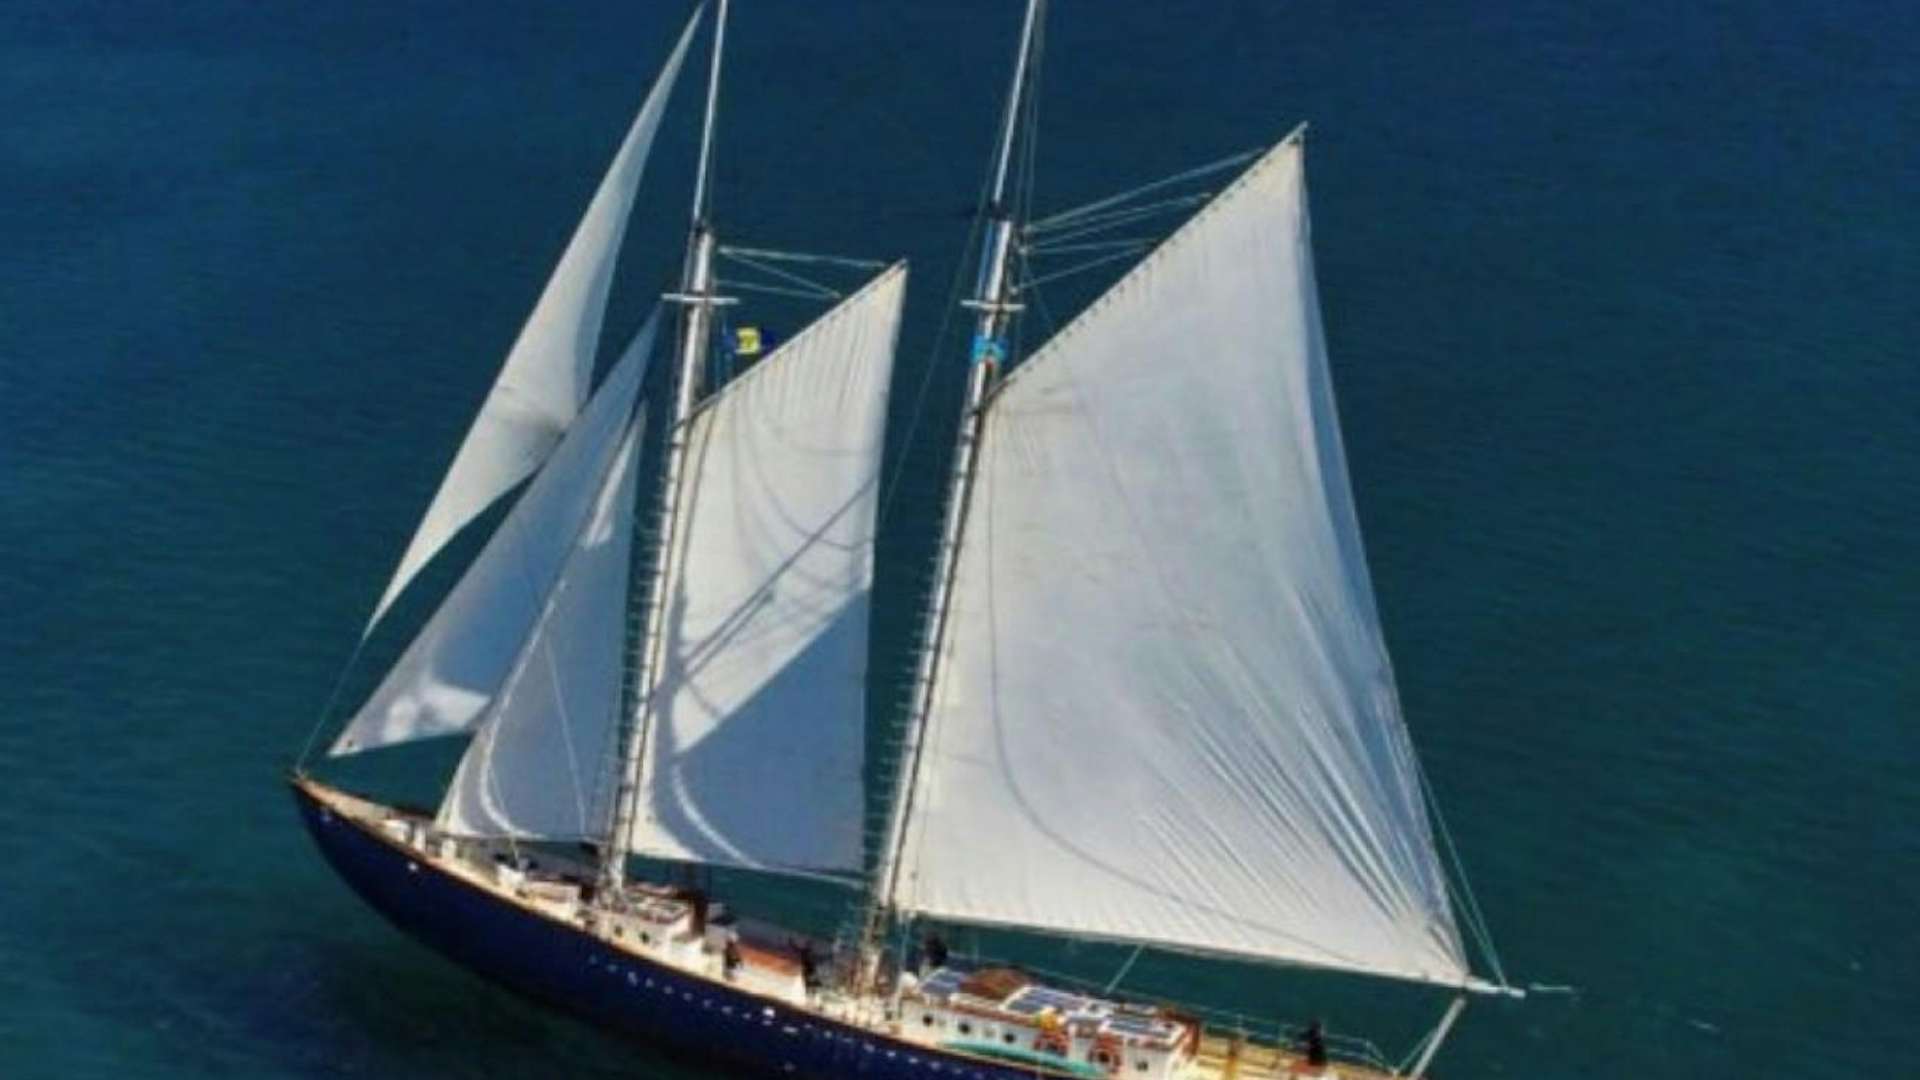 Watch Video for SCHOONER RUTH Yacht for Sale